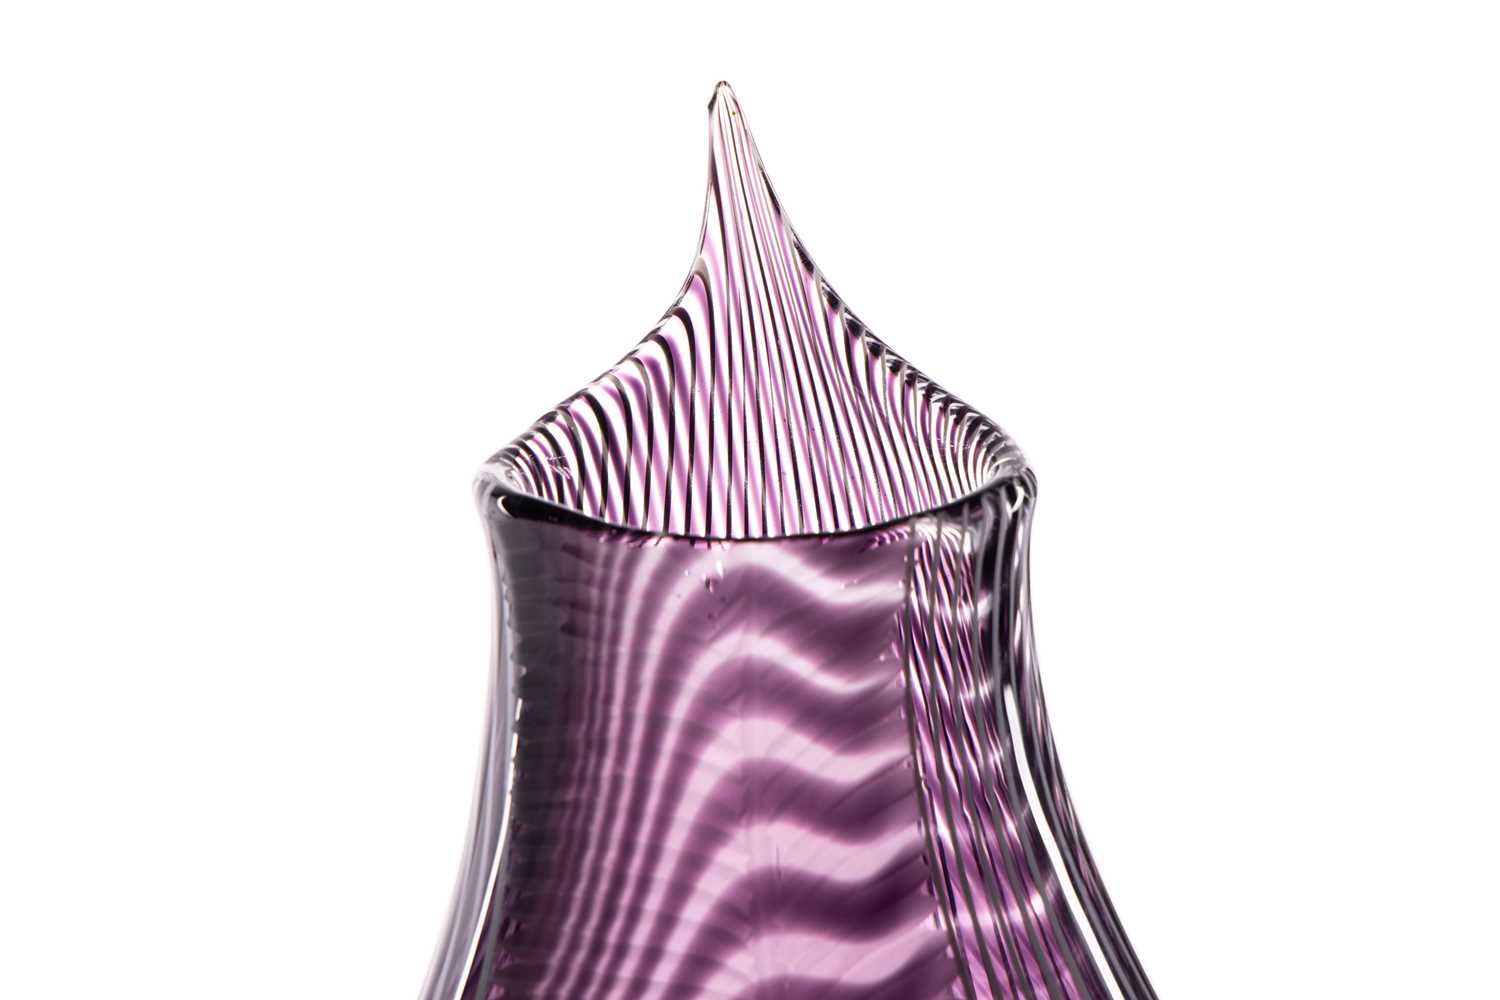 A Luca Vidal Murano large art glass vase with textured finish to one side, bespoke made for the - Image 5 of 9